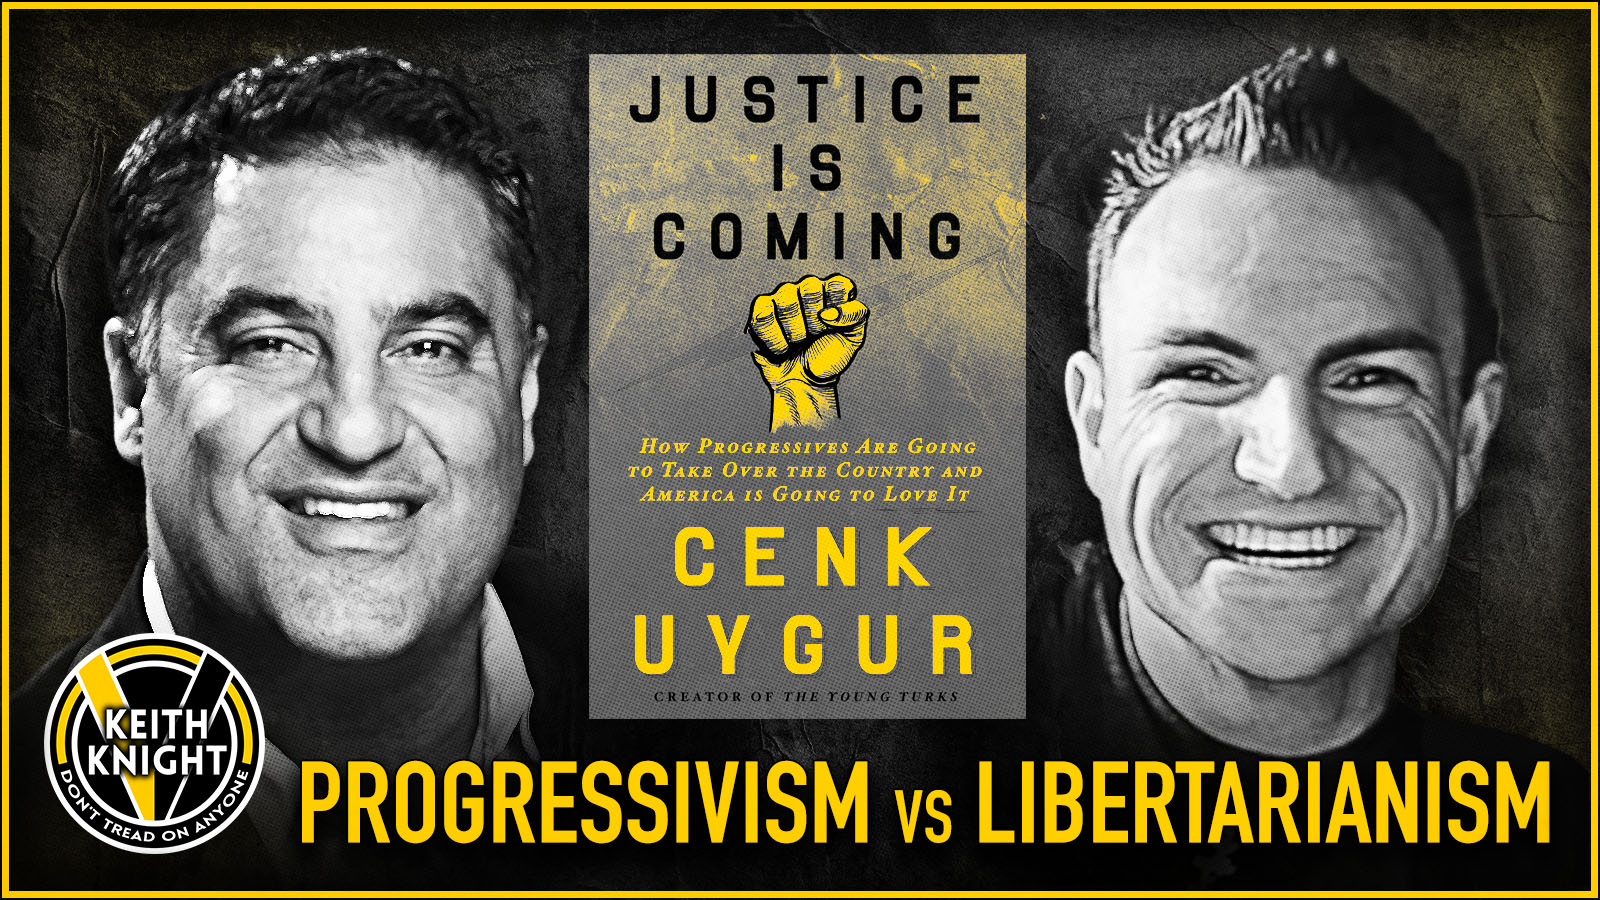 Justice is Coming! Cenk Uygur & Keith Knight